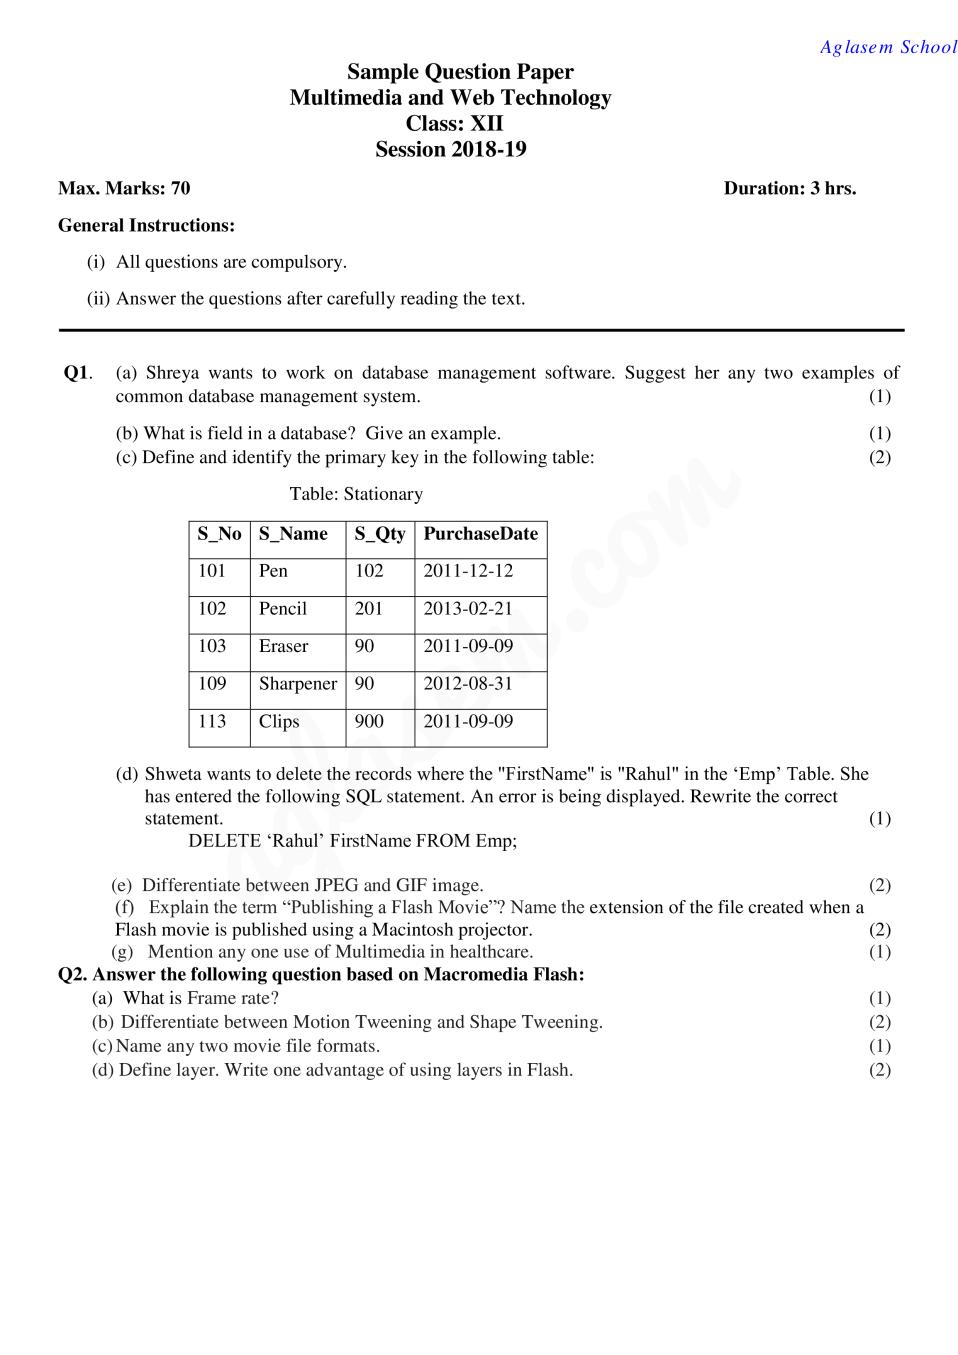 CBSE Class 12 Sample Paper 2020 for Multimedia and Web Technology - Page 1